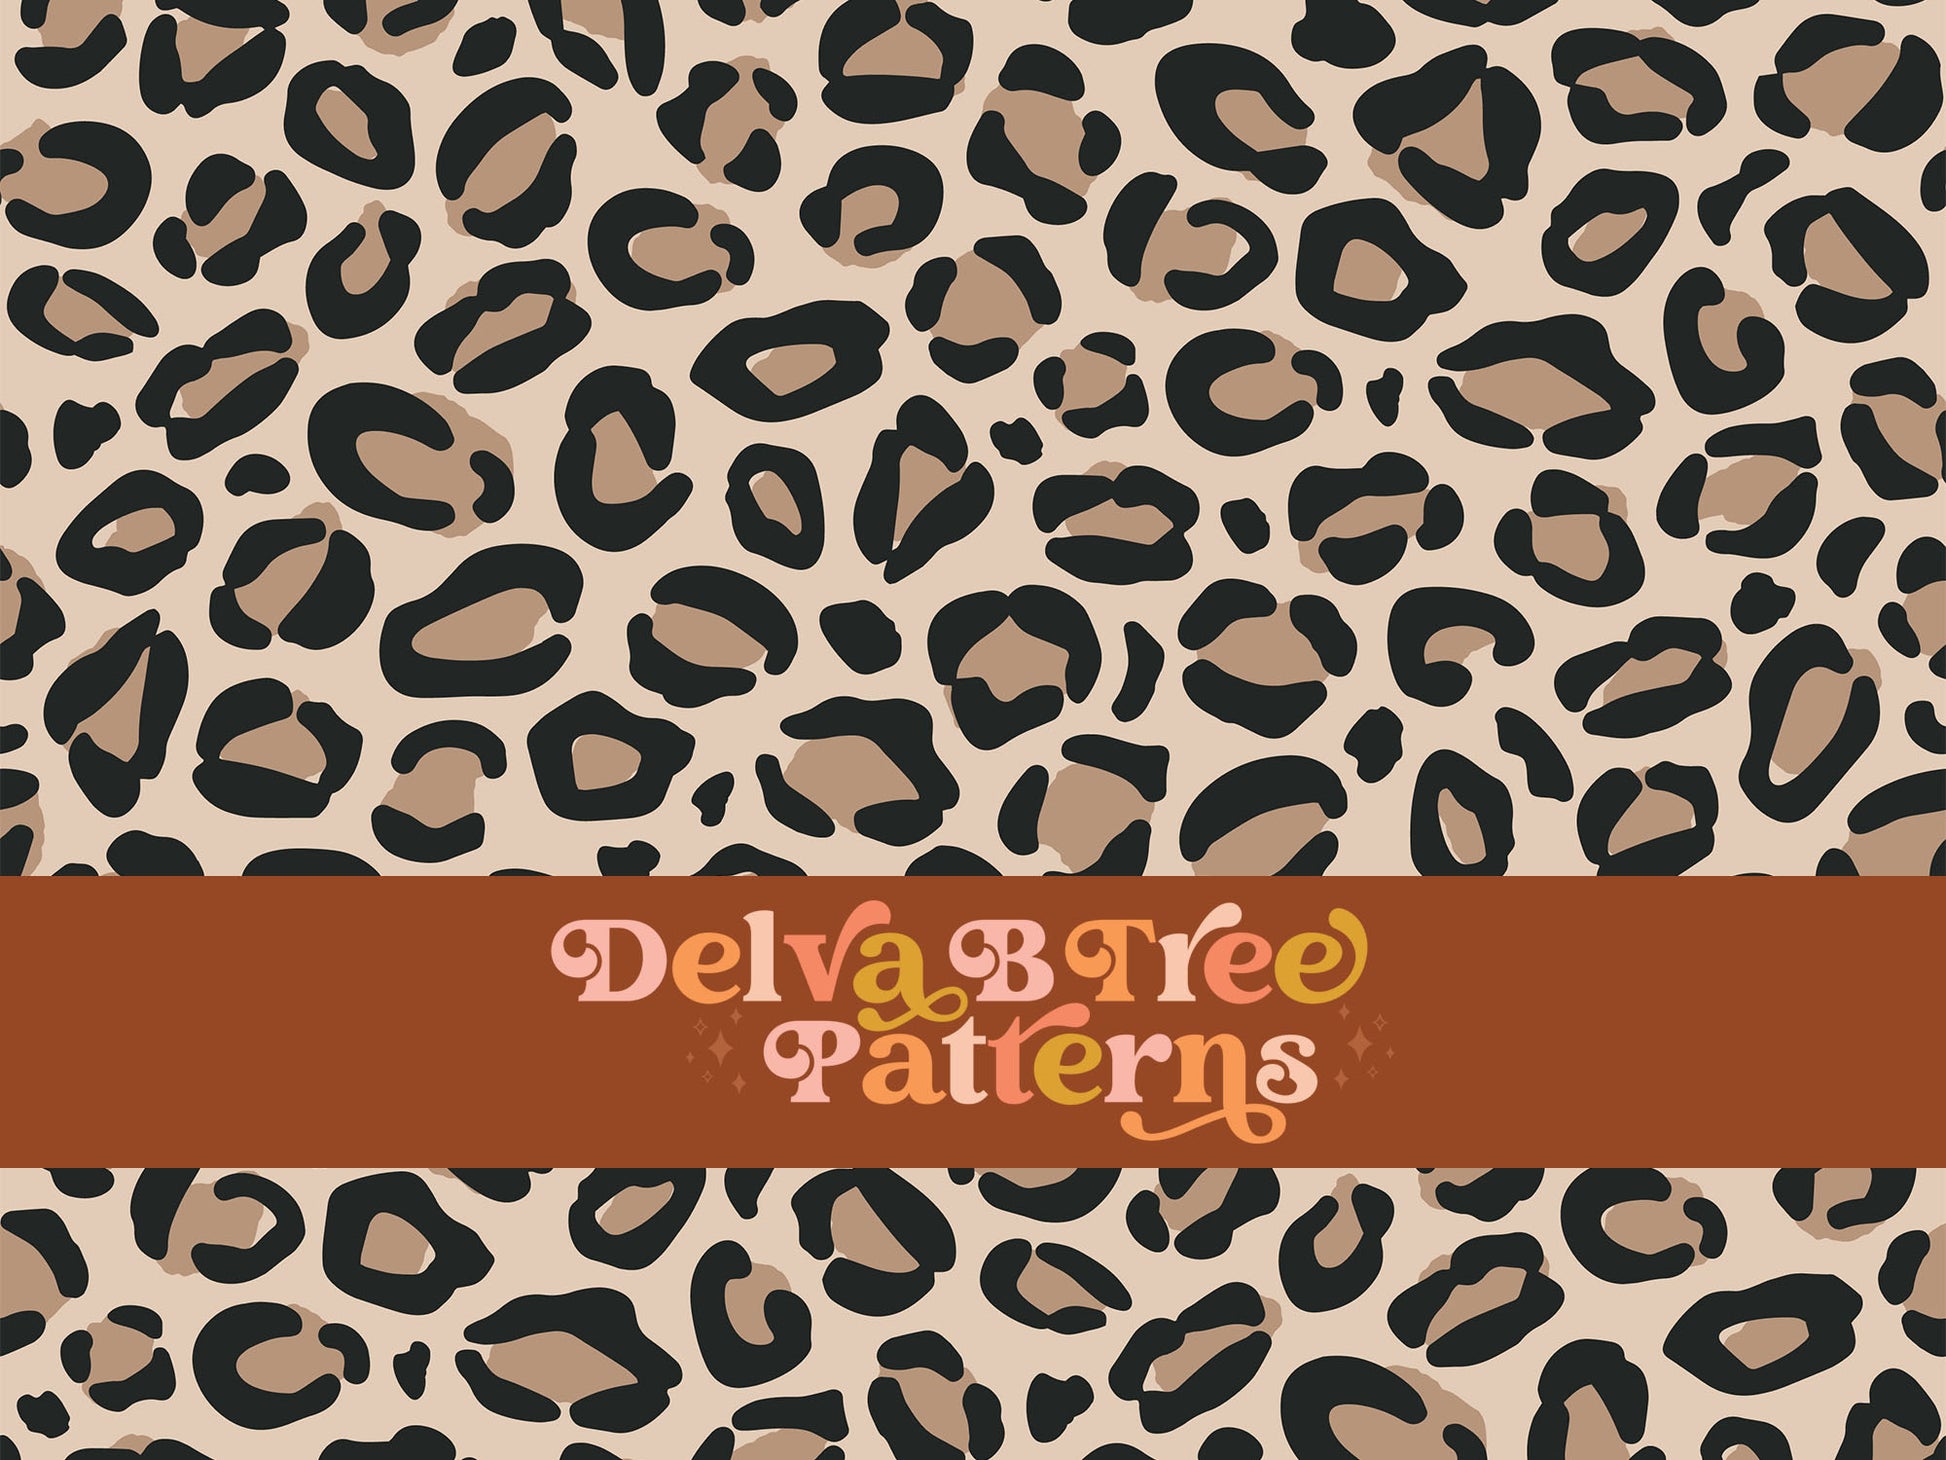 Tan, brown and black leopard seamless file for fabric printing. Animal Skin Leopard Print Repeat Pattern for textiles, polymailers, baby boy lovey blankets, nursery crib bedding, kids clothing, girls hair accessories, home decor accents, pet products.